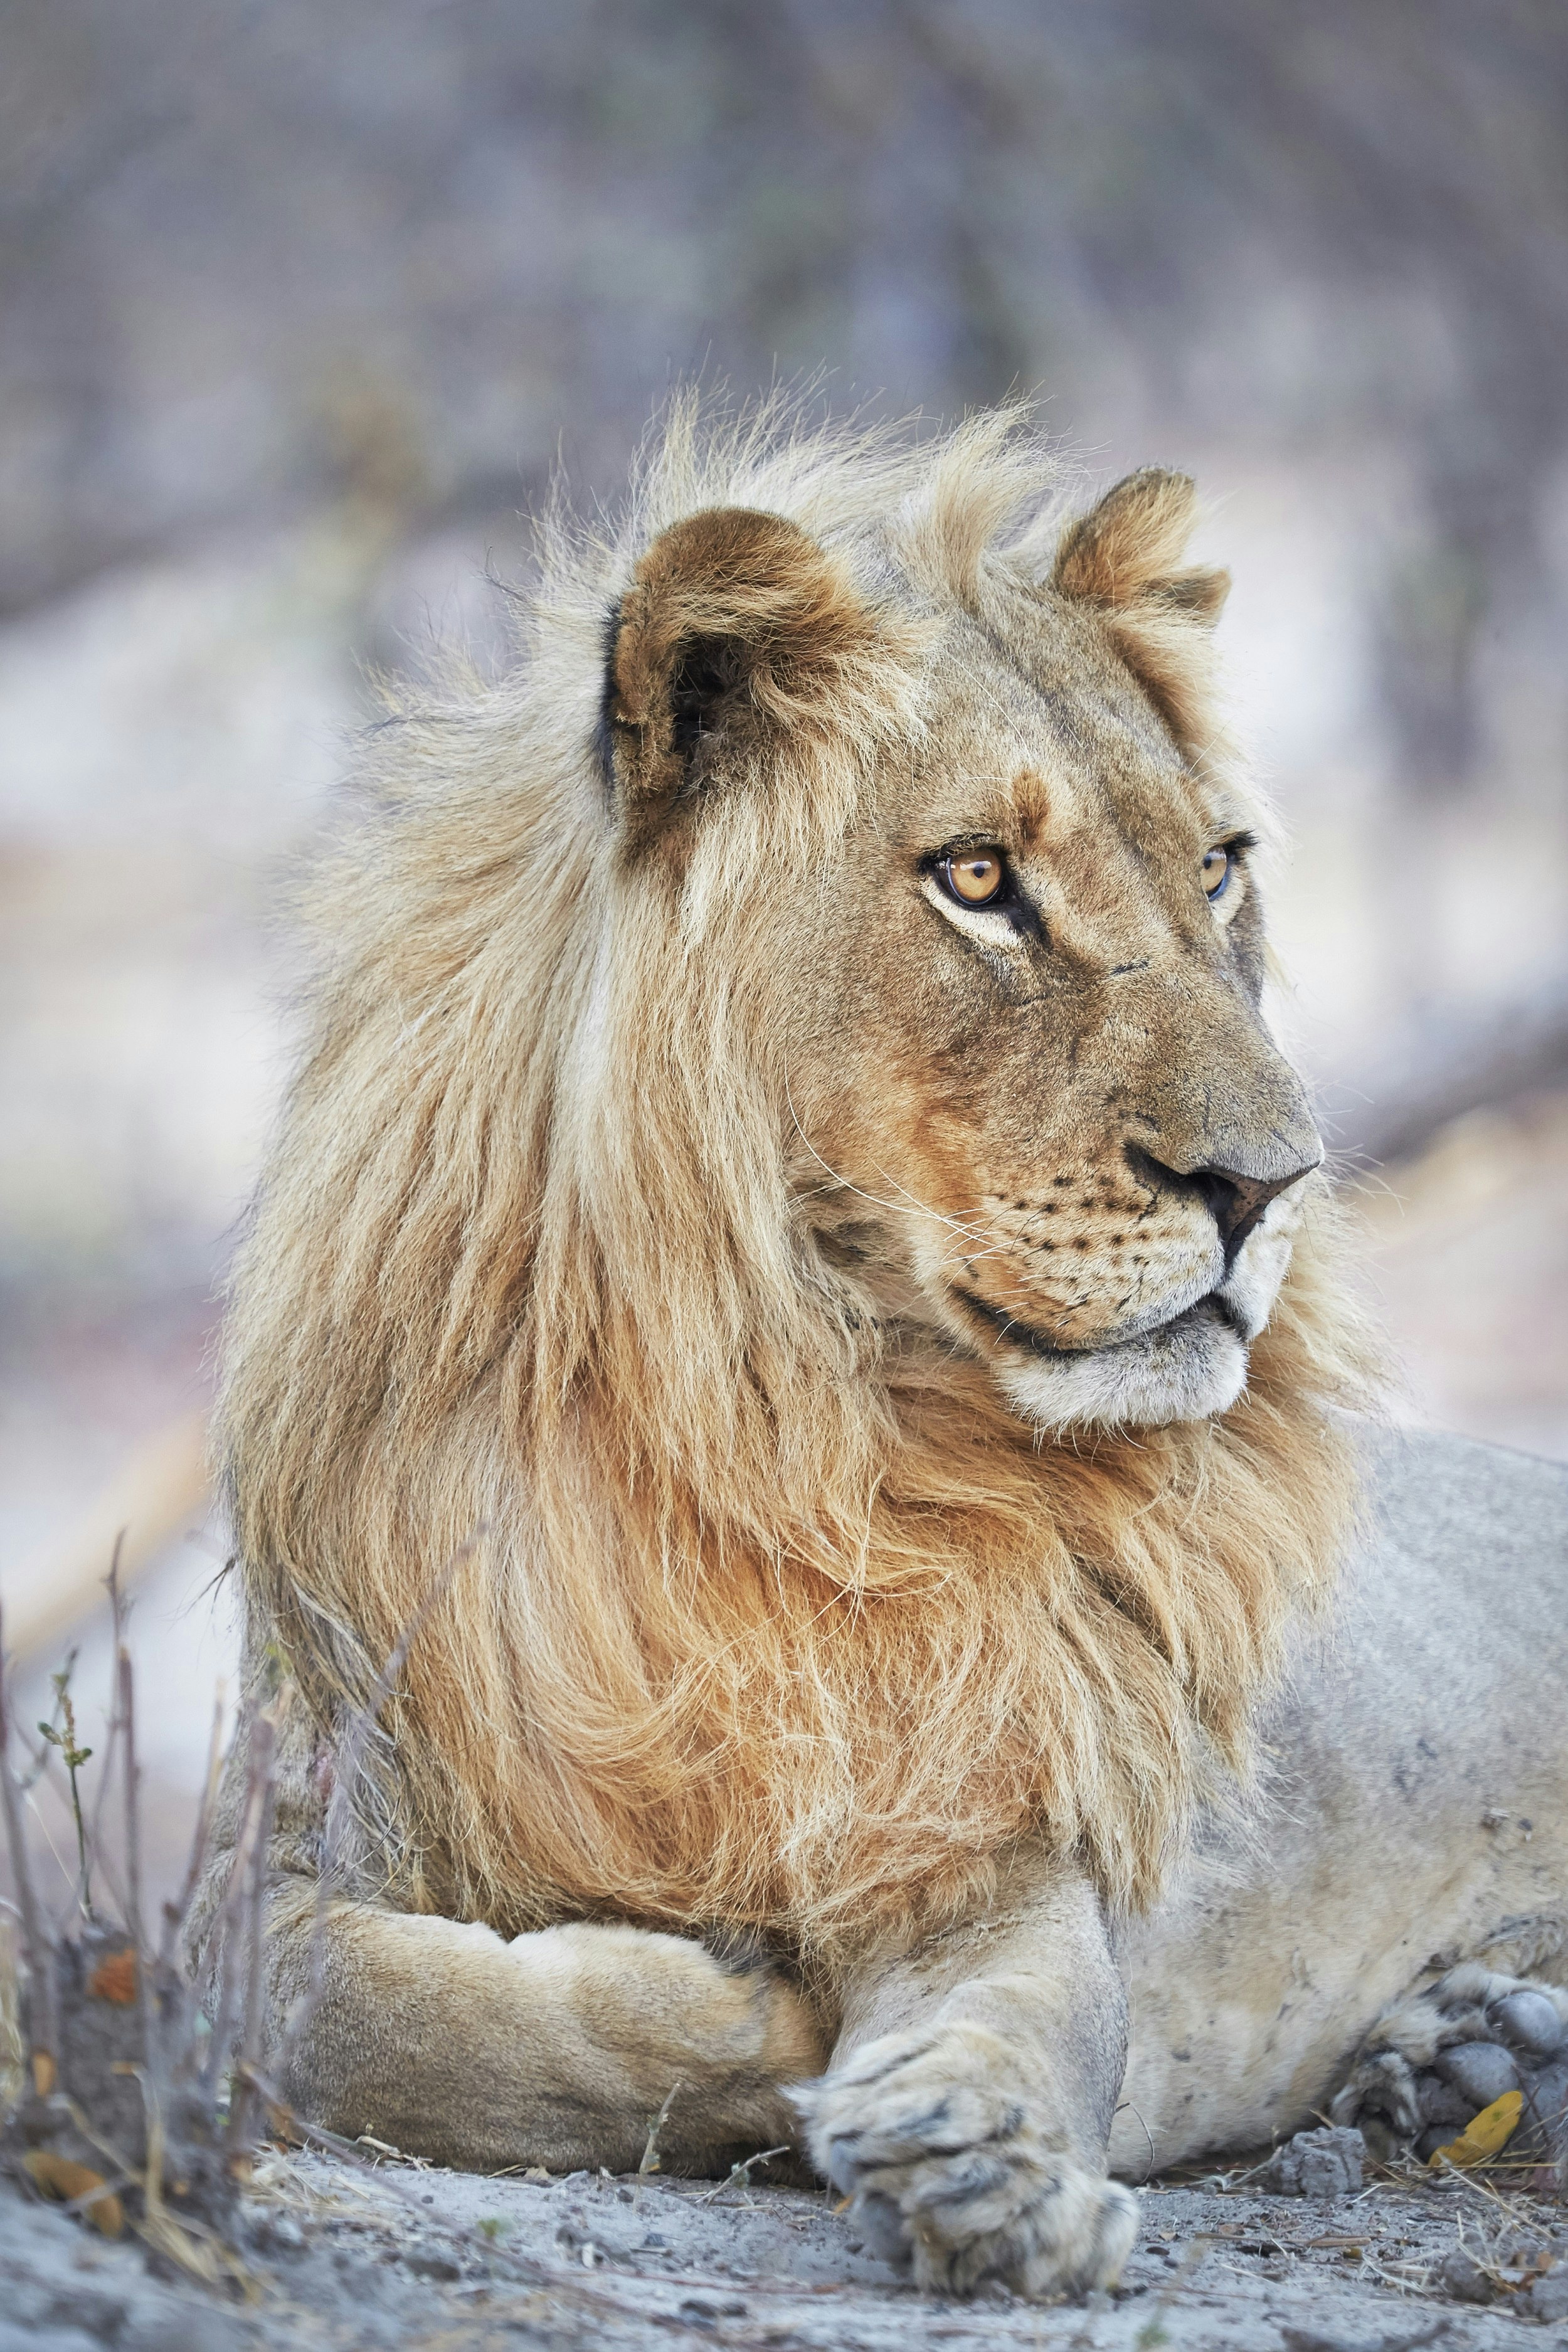 A male lion stares intently at something off to the right of the image; it's laying towards the camera, with its front legs extended. Its mane is tawny coloured.